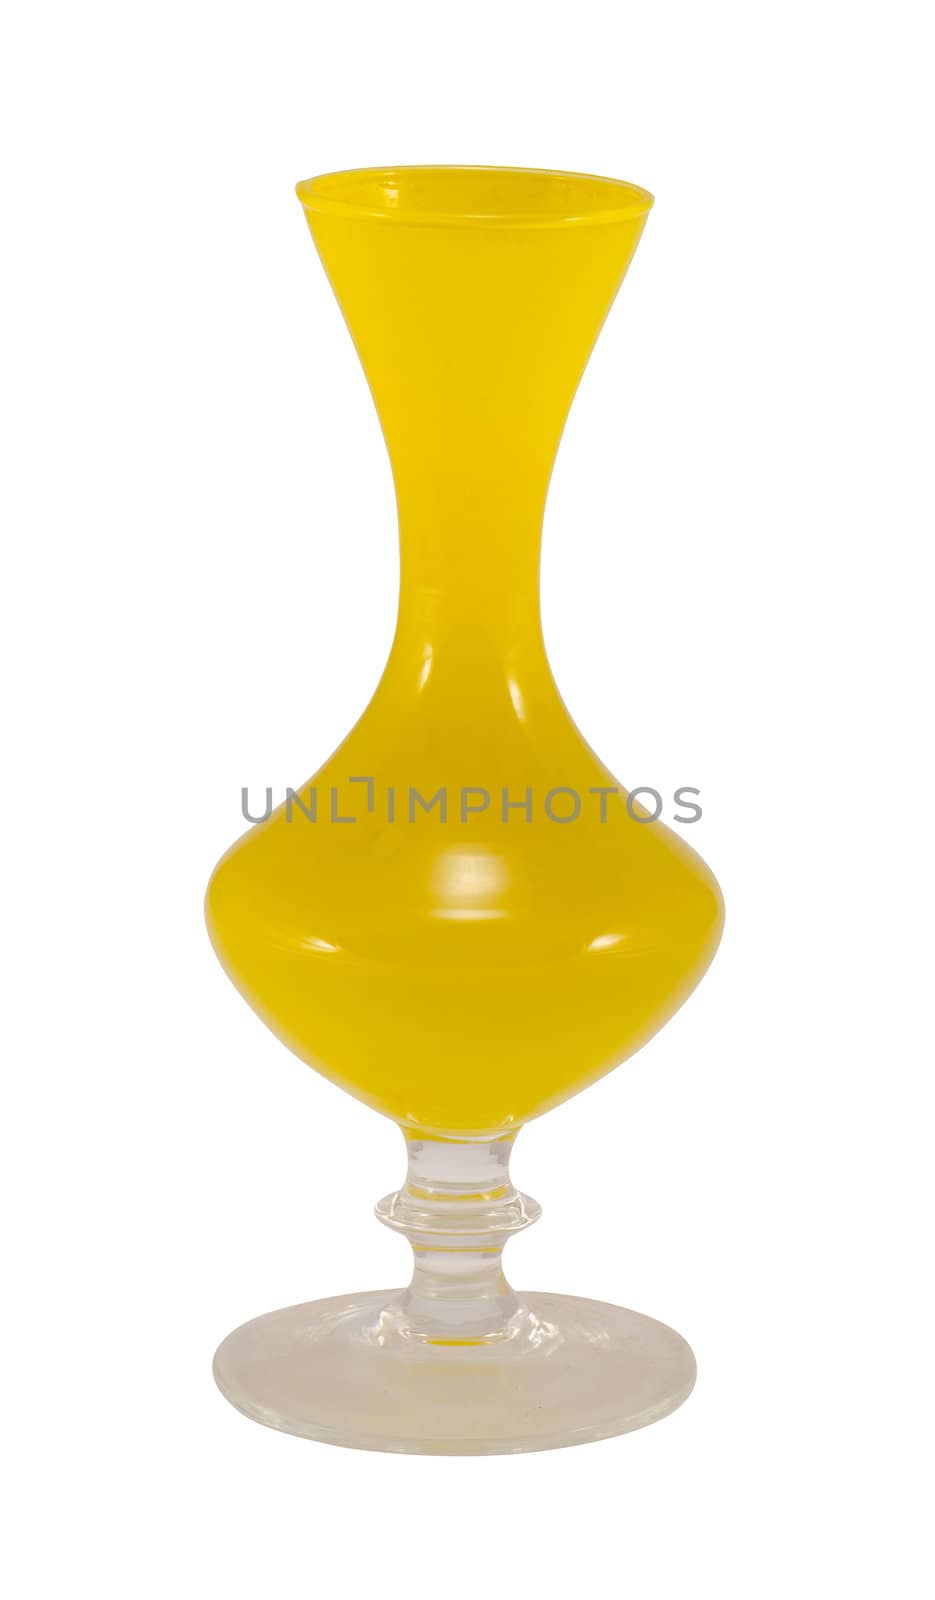 Retro glass yellow vase isolated on white. Old decorative object.